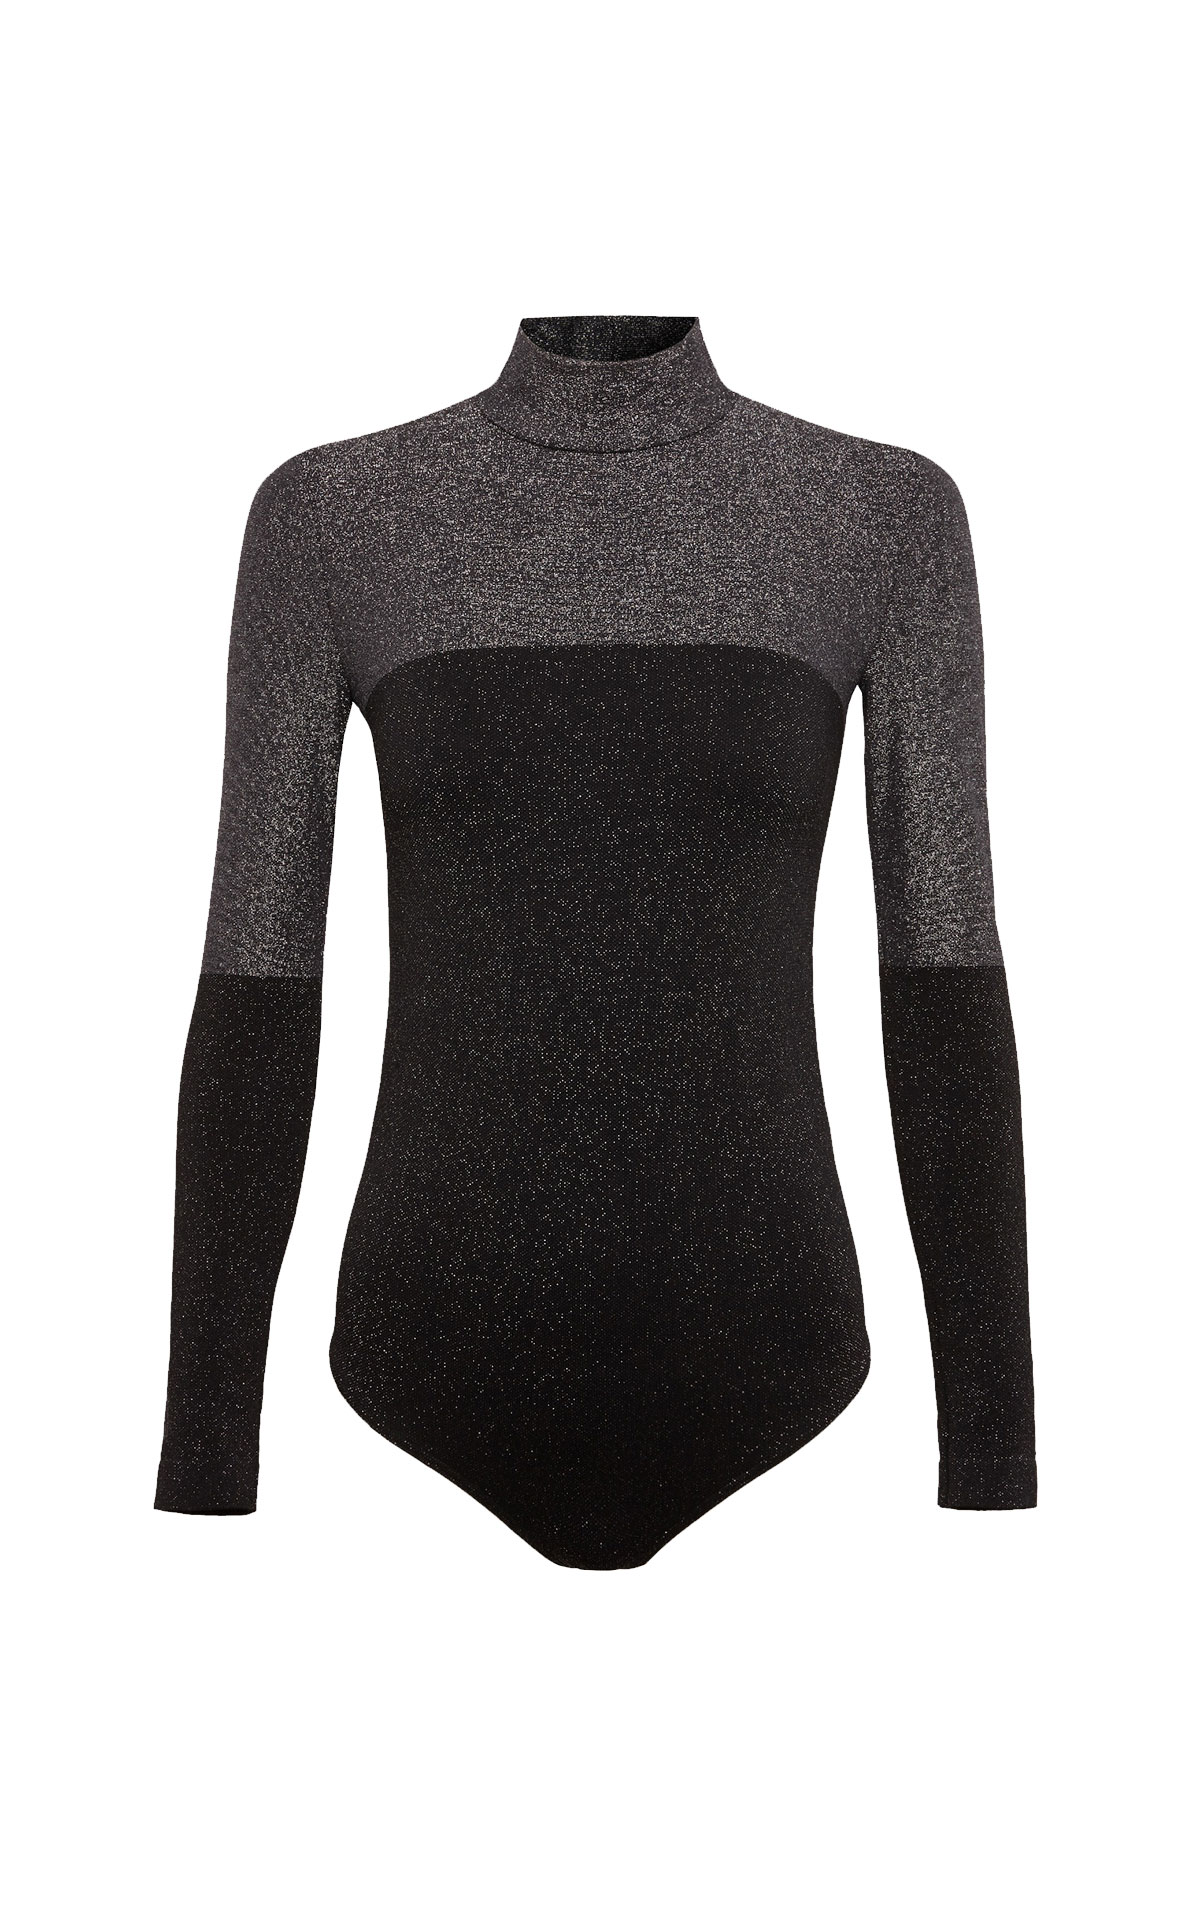 Wolford Selene string body from Bicester Village